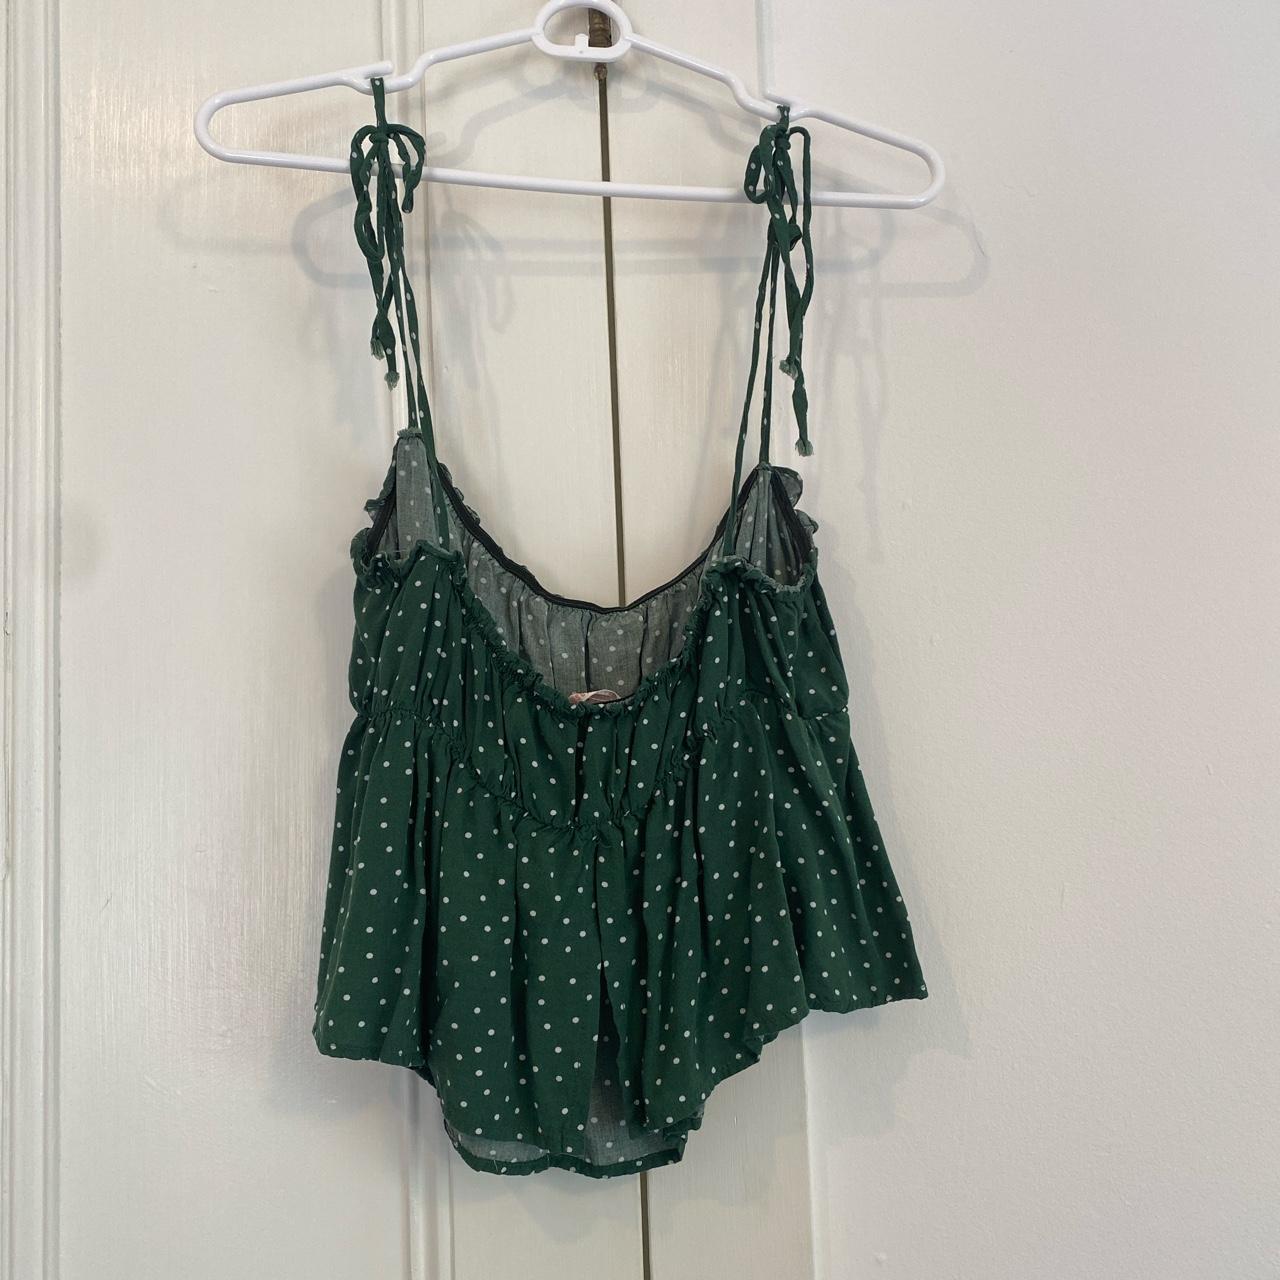 Product Image 2 - green polka dot flowy top

has